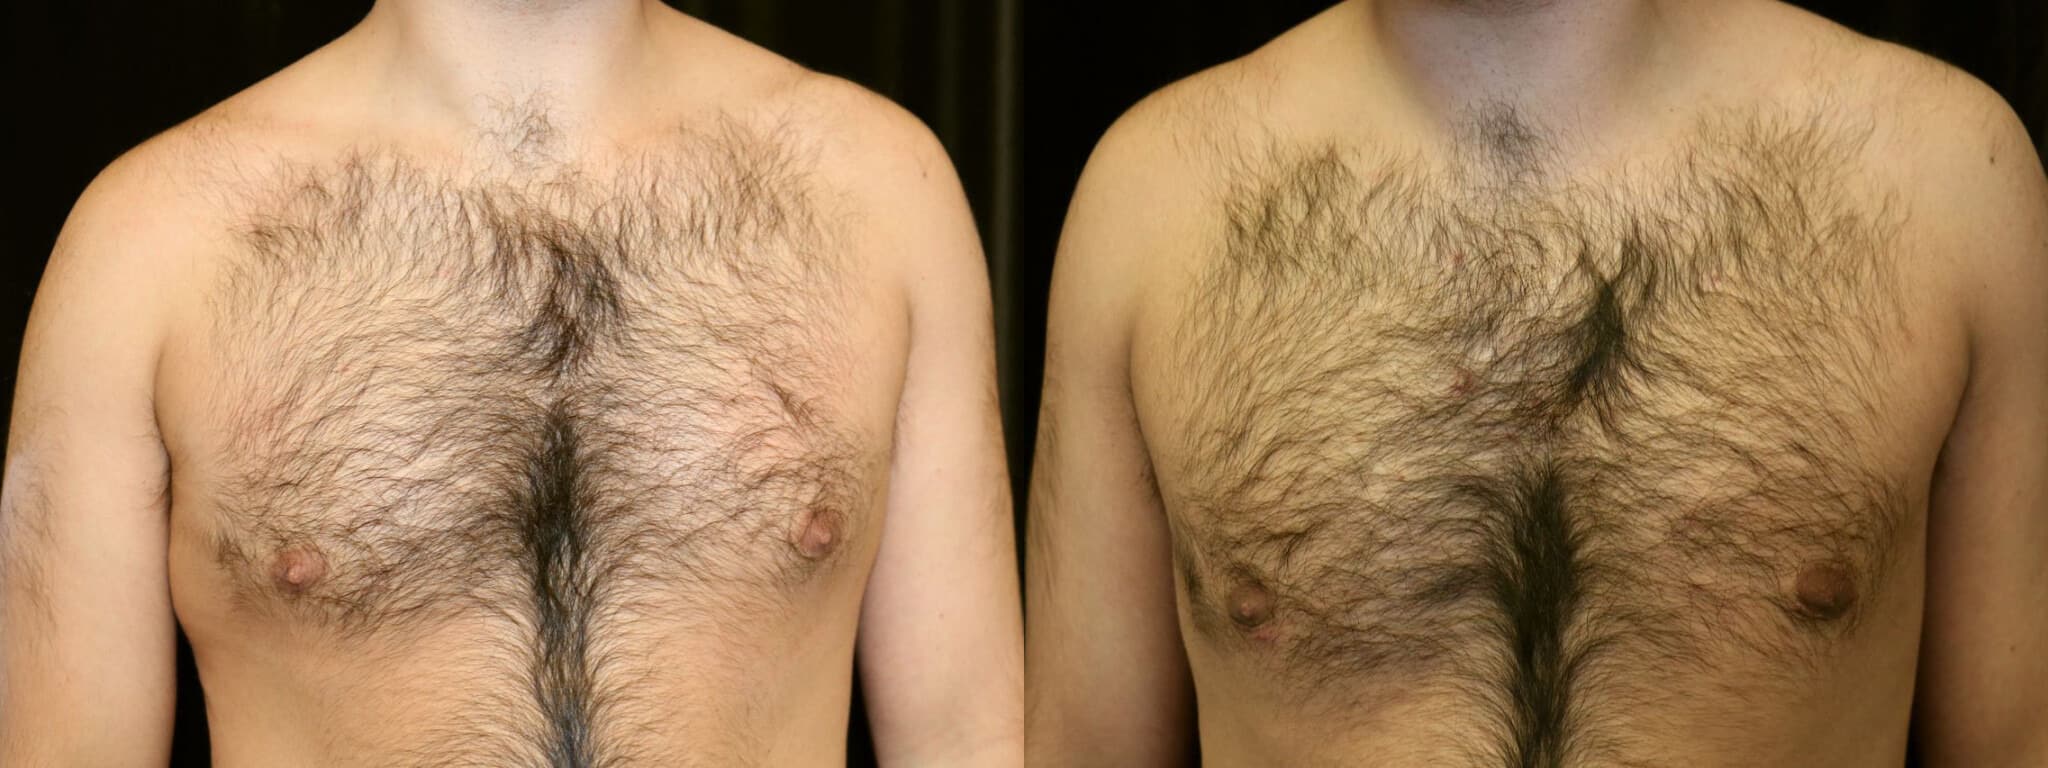 Gynecomastia Patient 14 Before & After